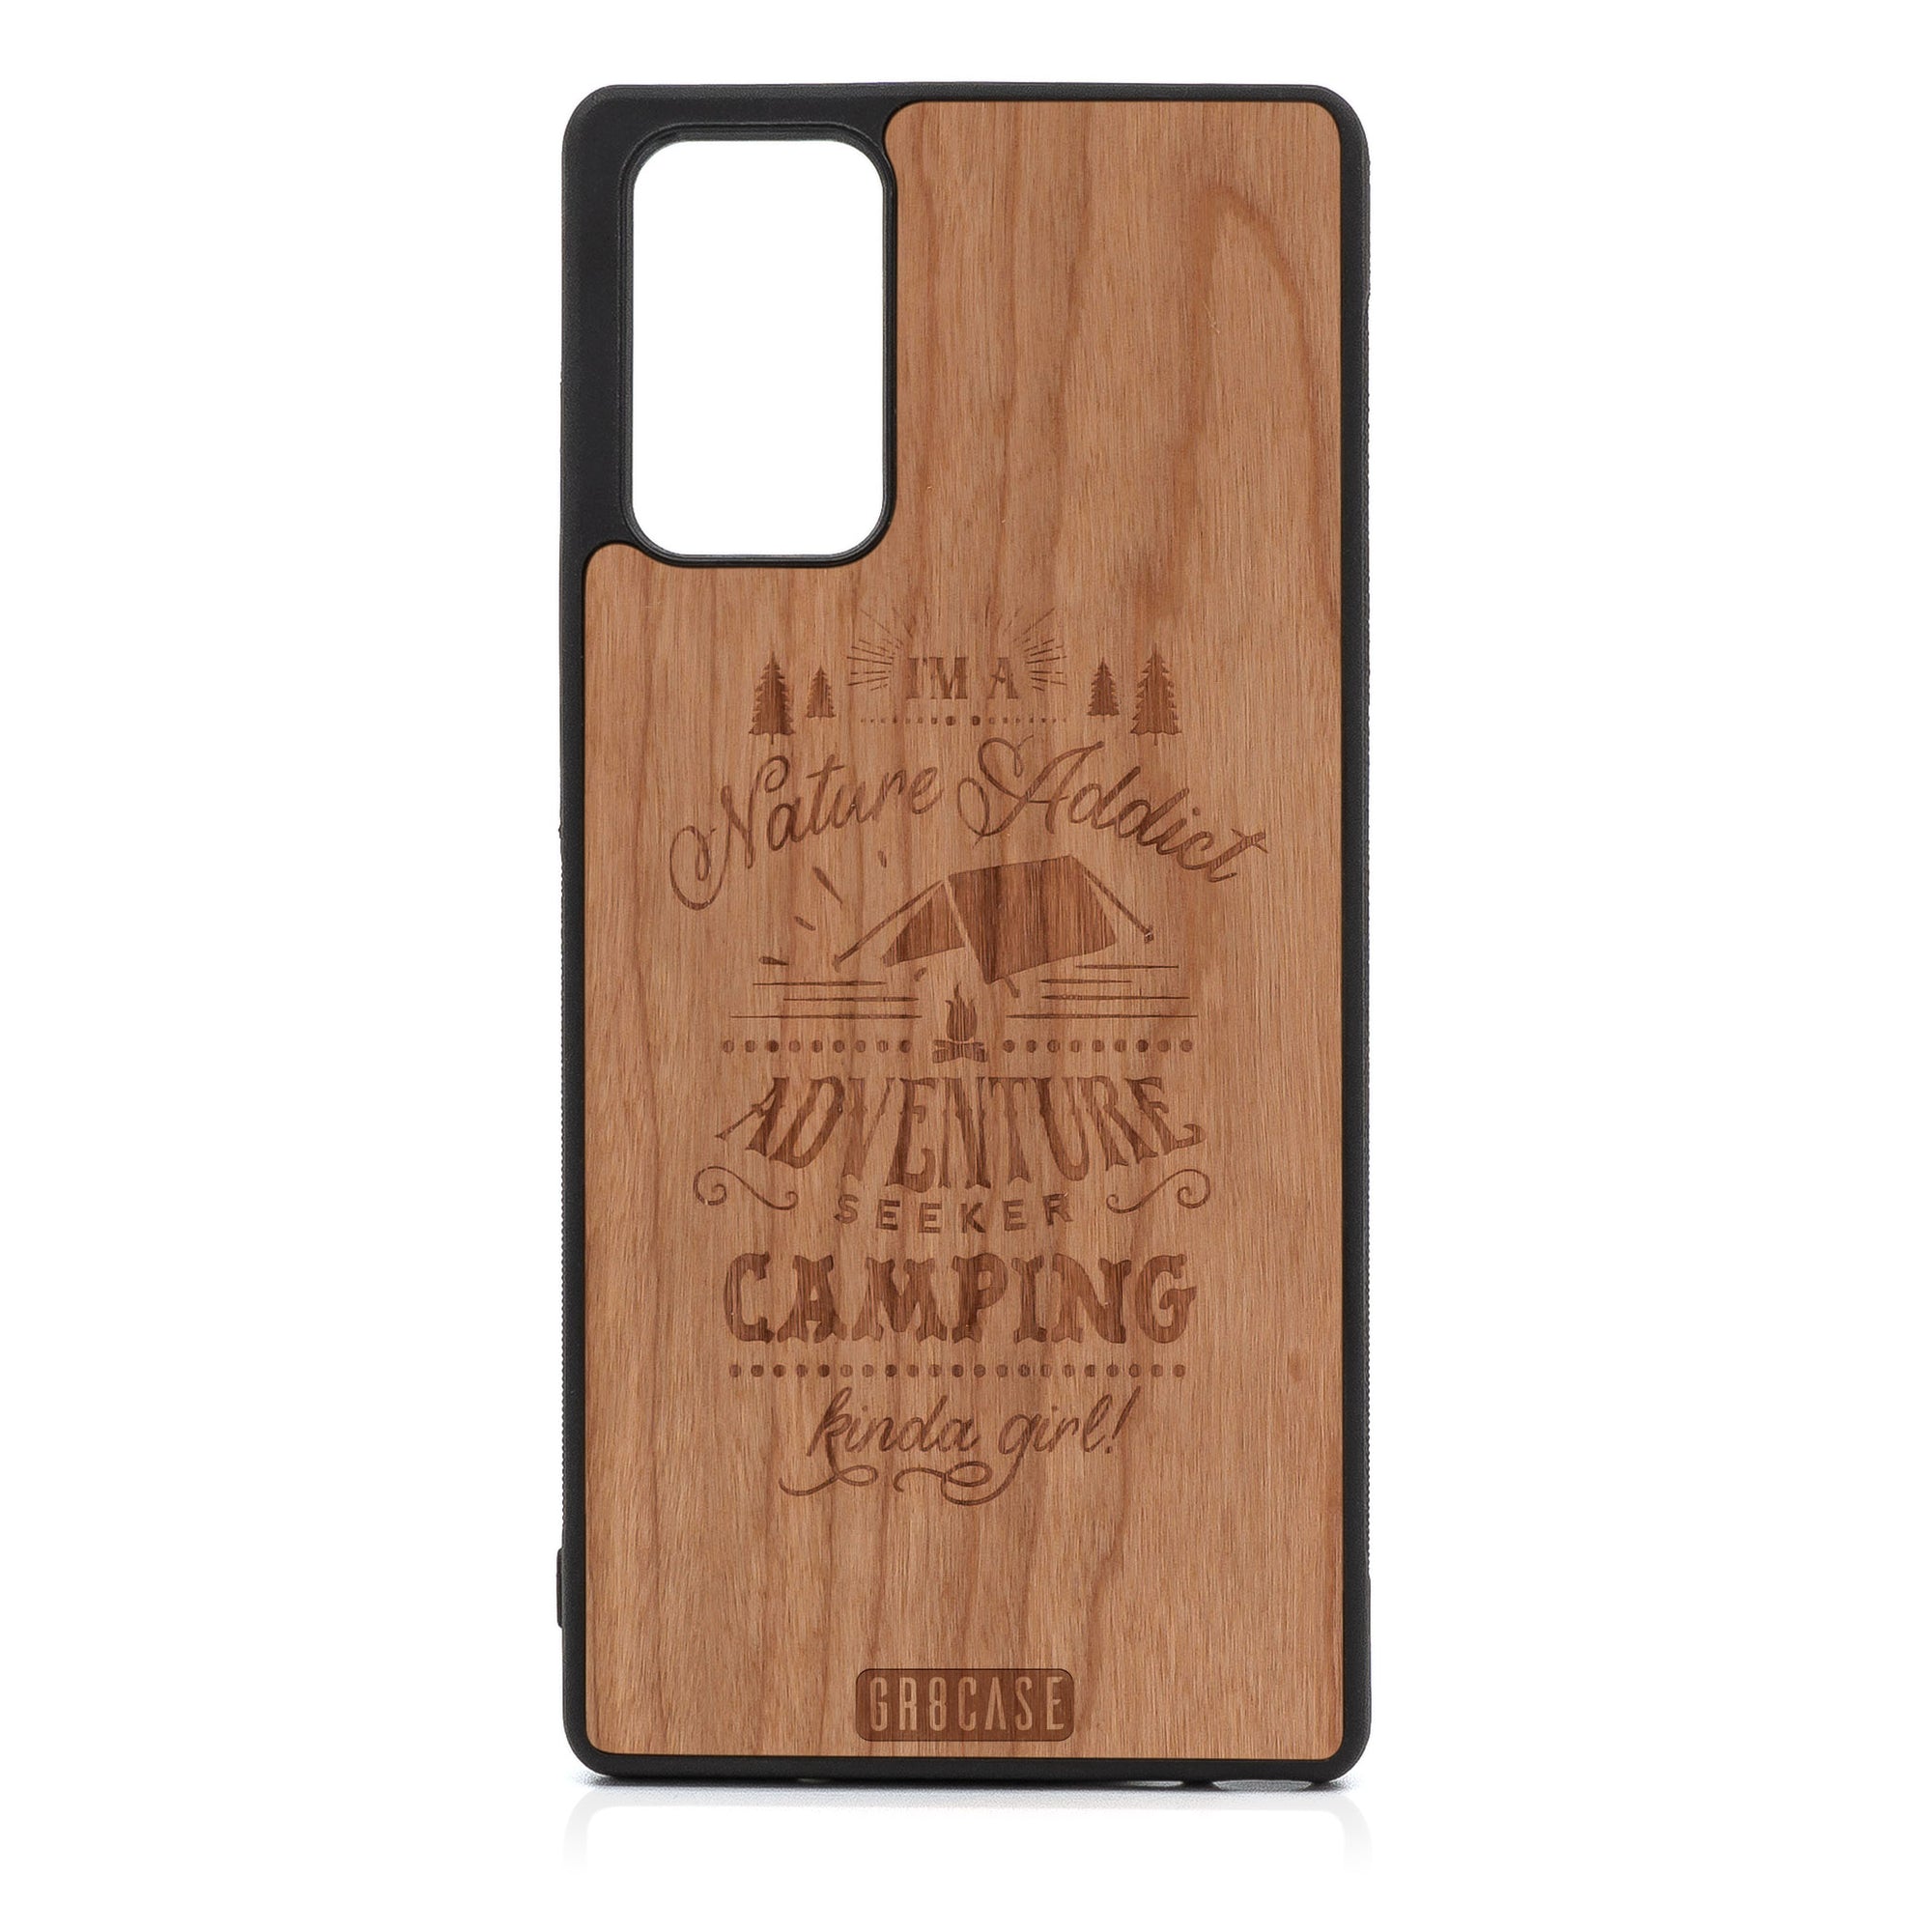 I'm A Nature Addict Adventure Seeker Camping Kinda Girl Design Wood Case For Samsung Galaxy Note 20